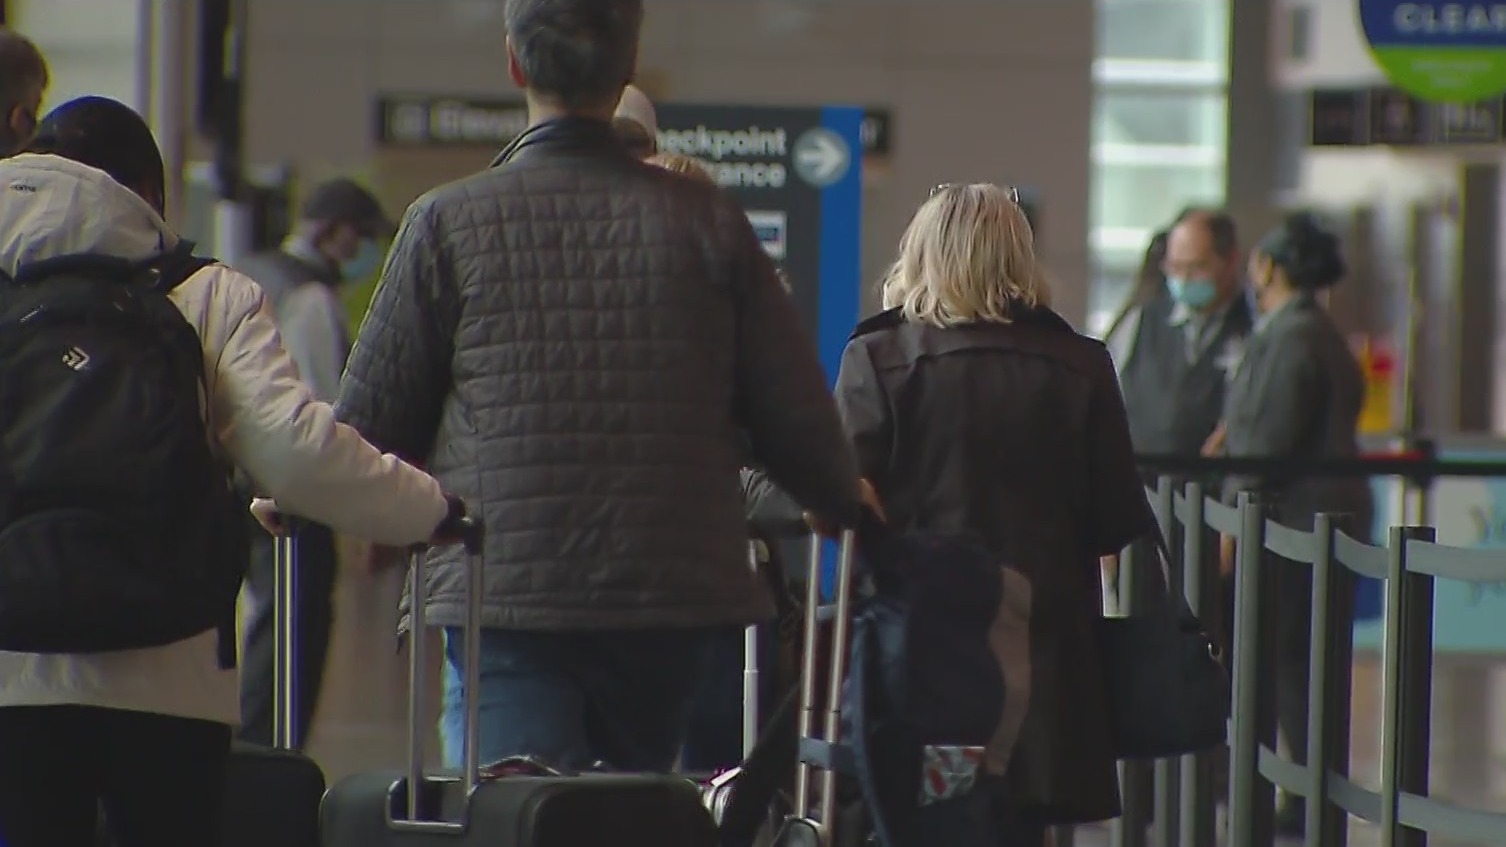 As COVID-19 Cases Rise, Is It Safe To Make Travel Plans?